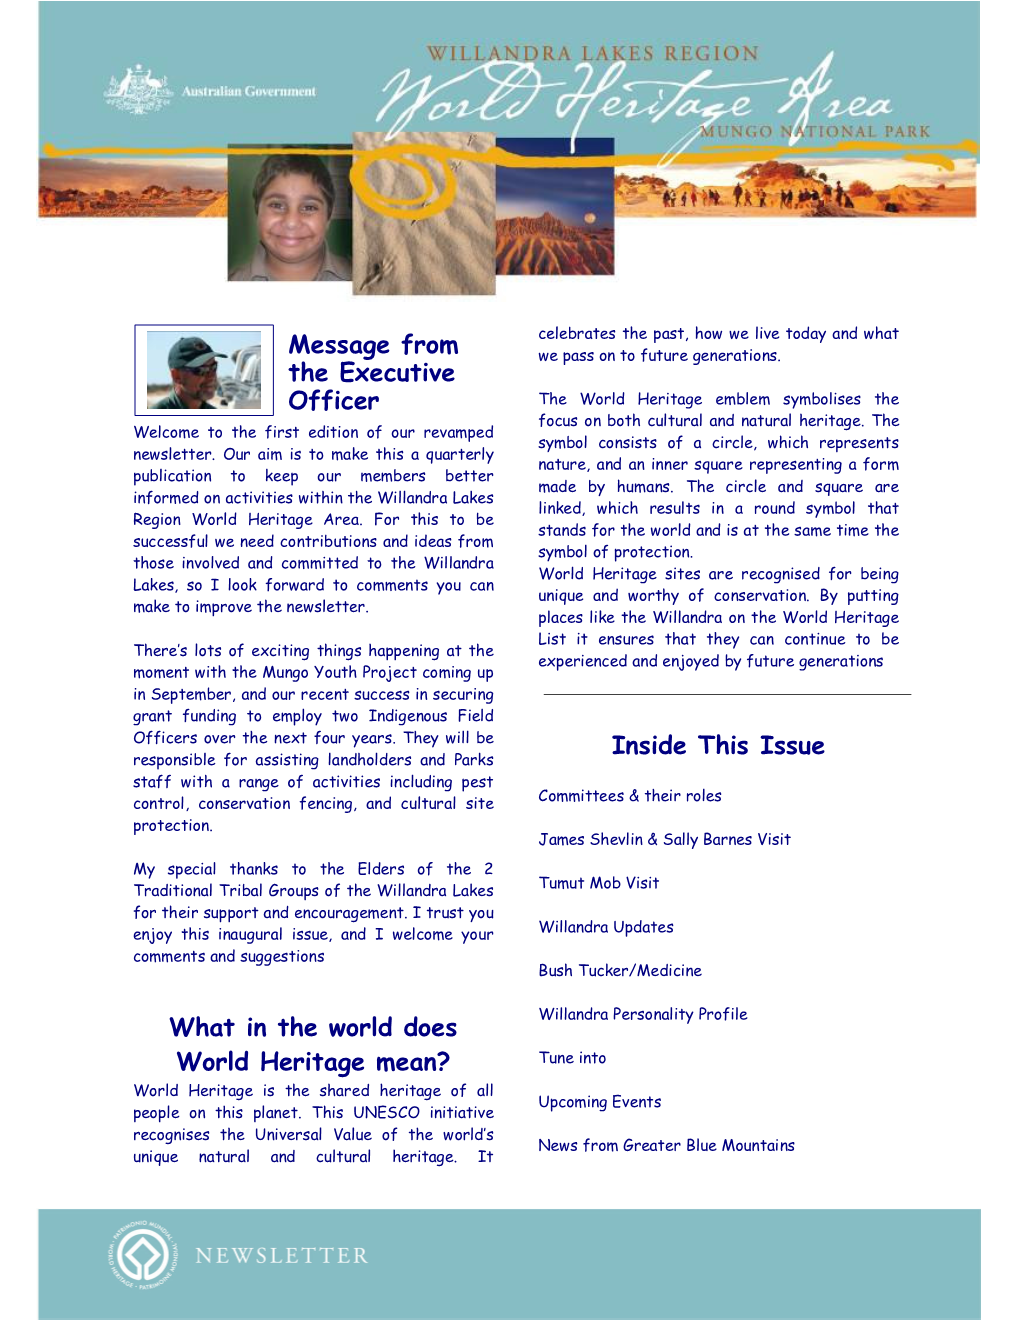 Message from the Executive Officer What in the World Does World Heritage Mean? Inside This Issue